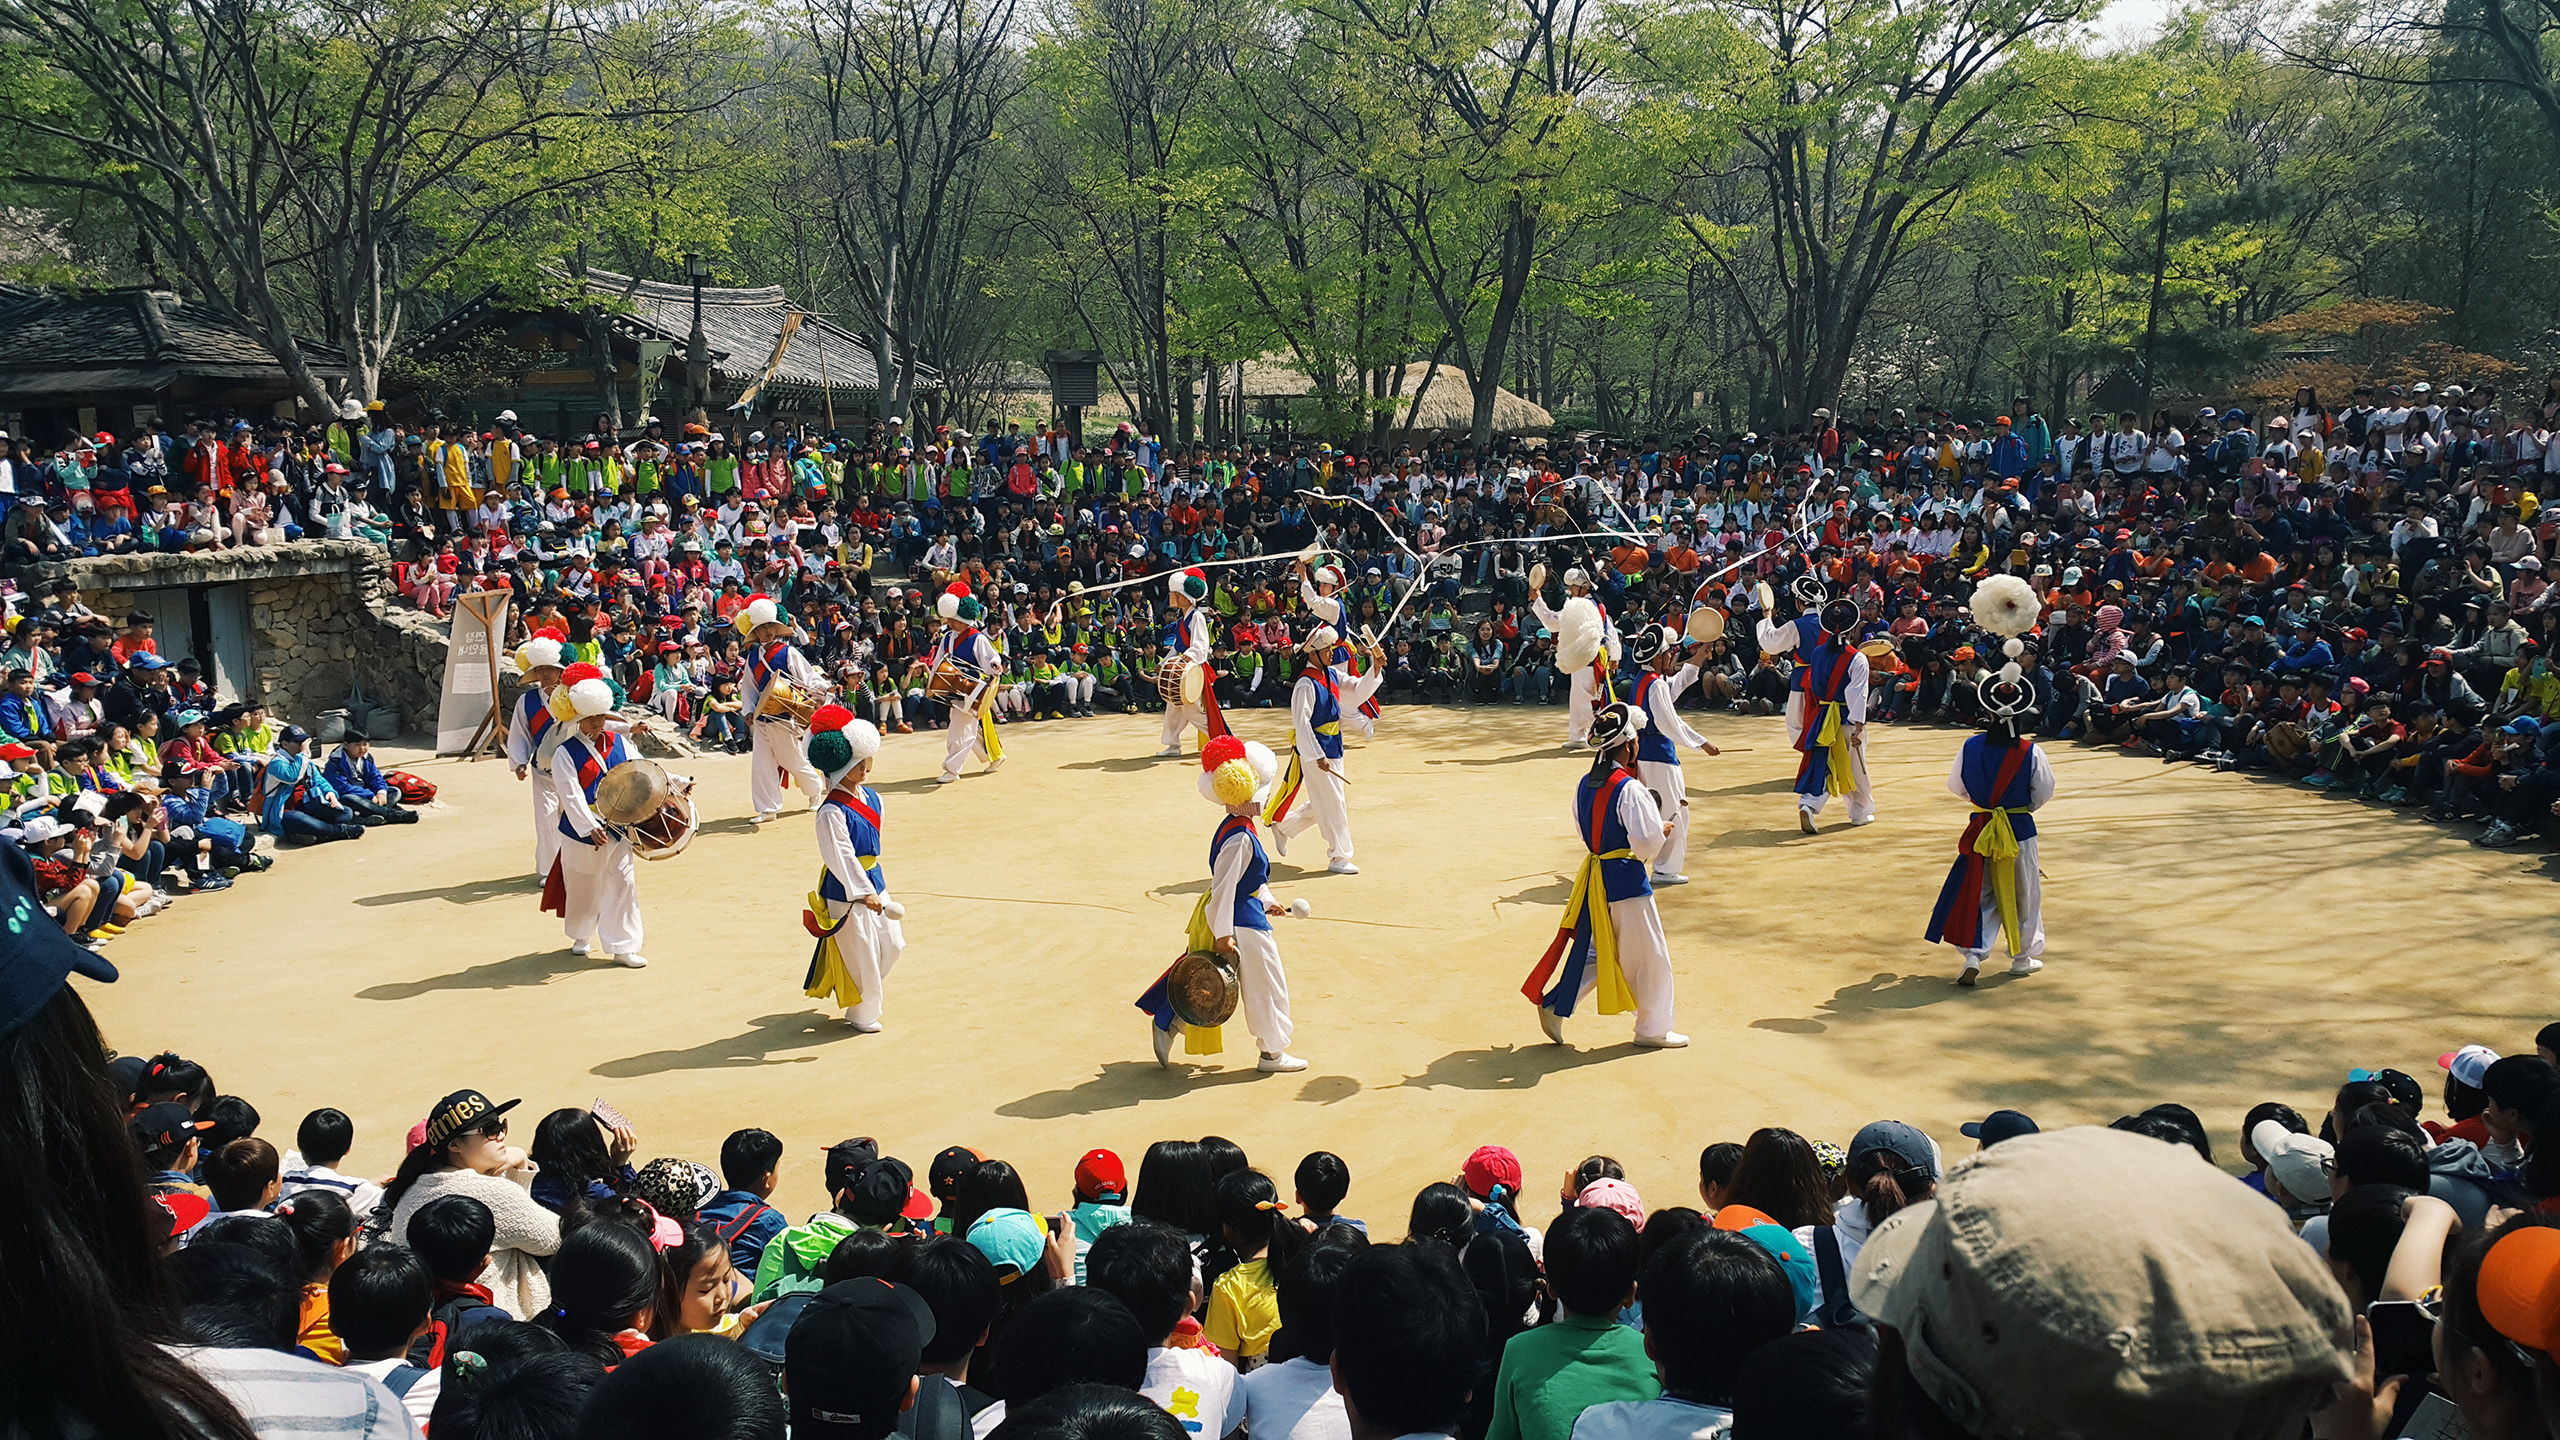 Dancers in traditional costume in circle surrounded by crowds of spectators